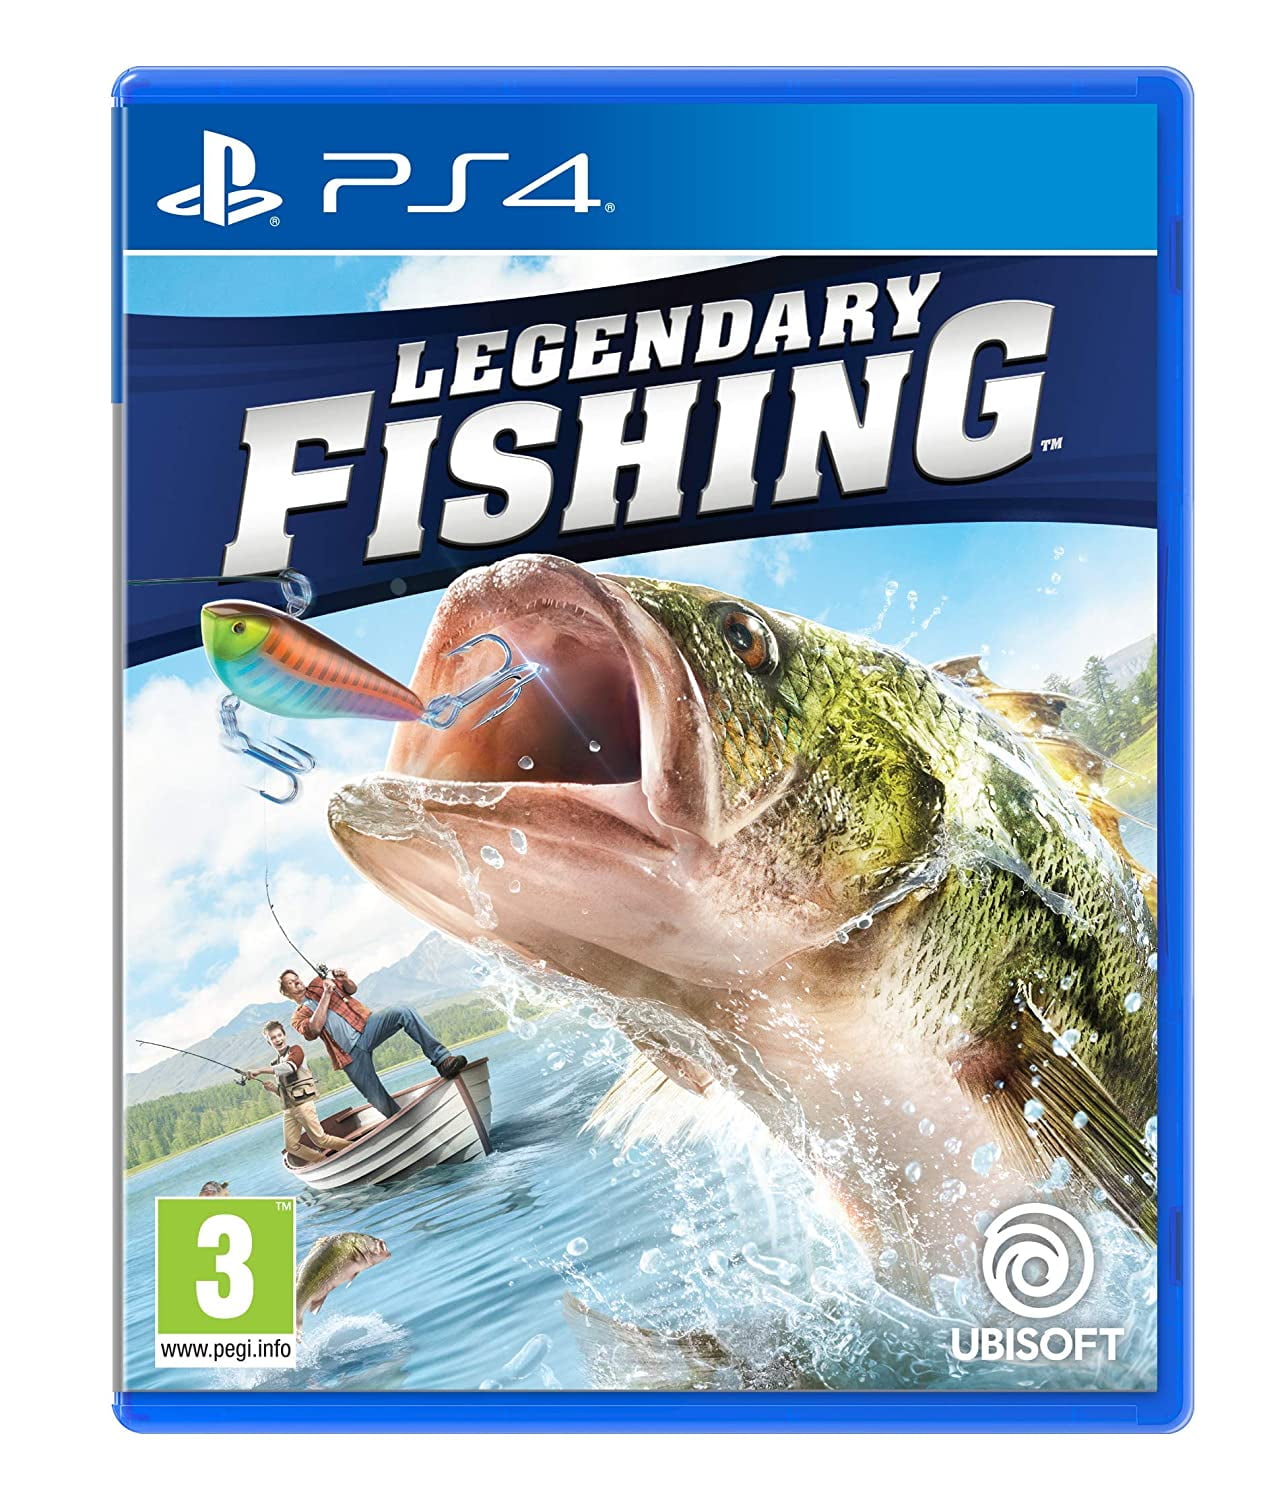 Sports Sony PlayStation 3 Activision Fishing Video Games for sale